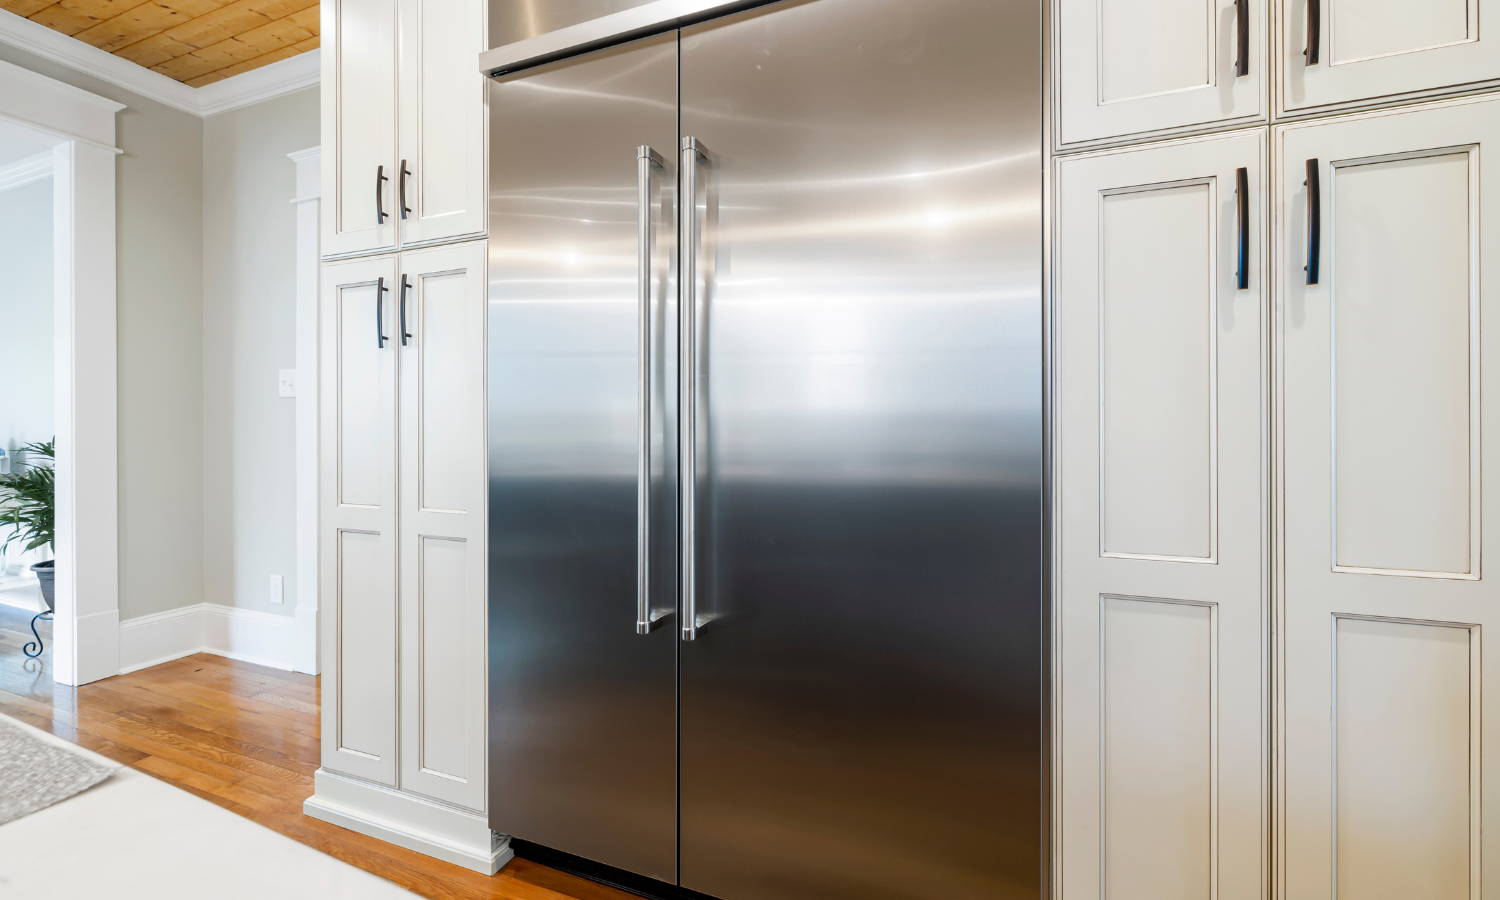 a large stainless steel refrigerator in a kitchen